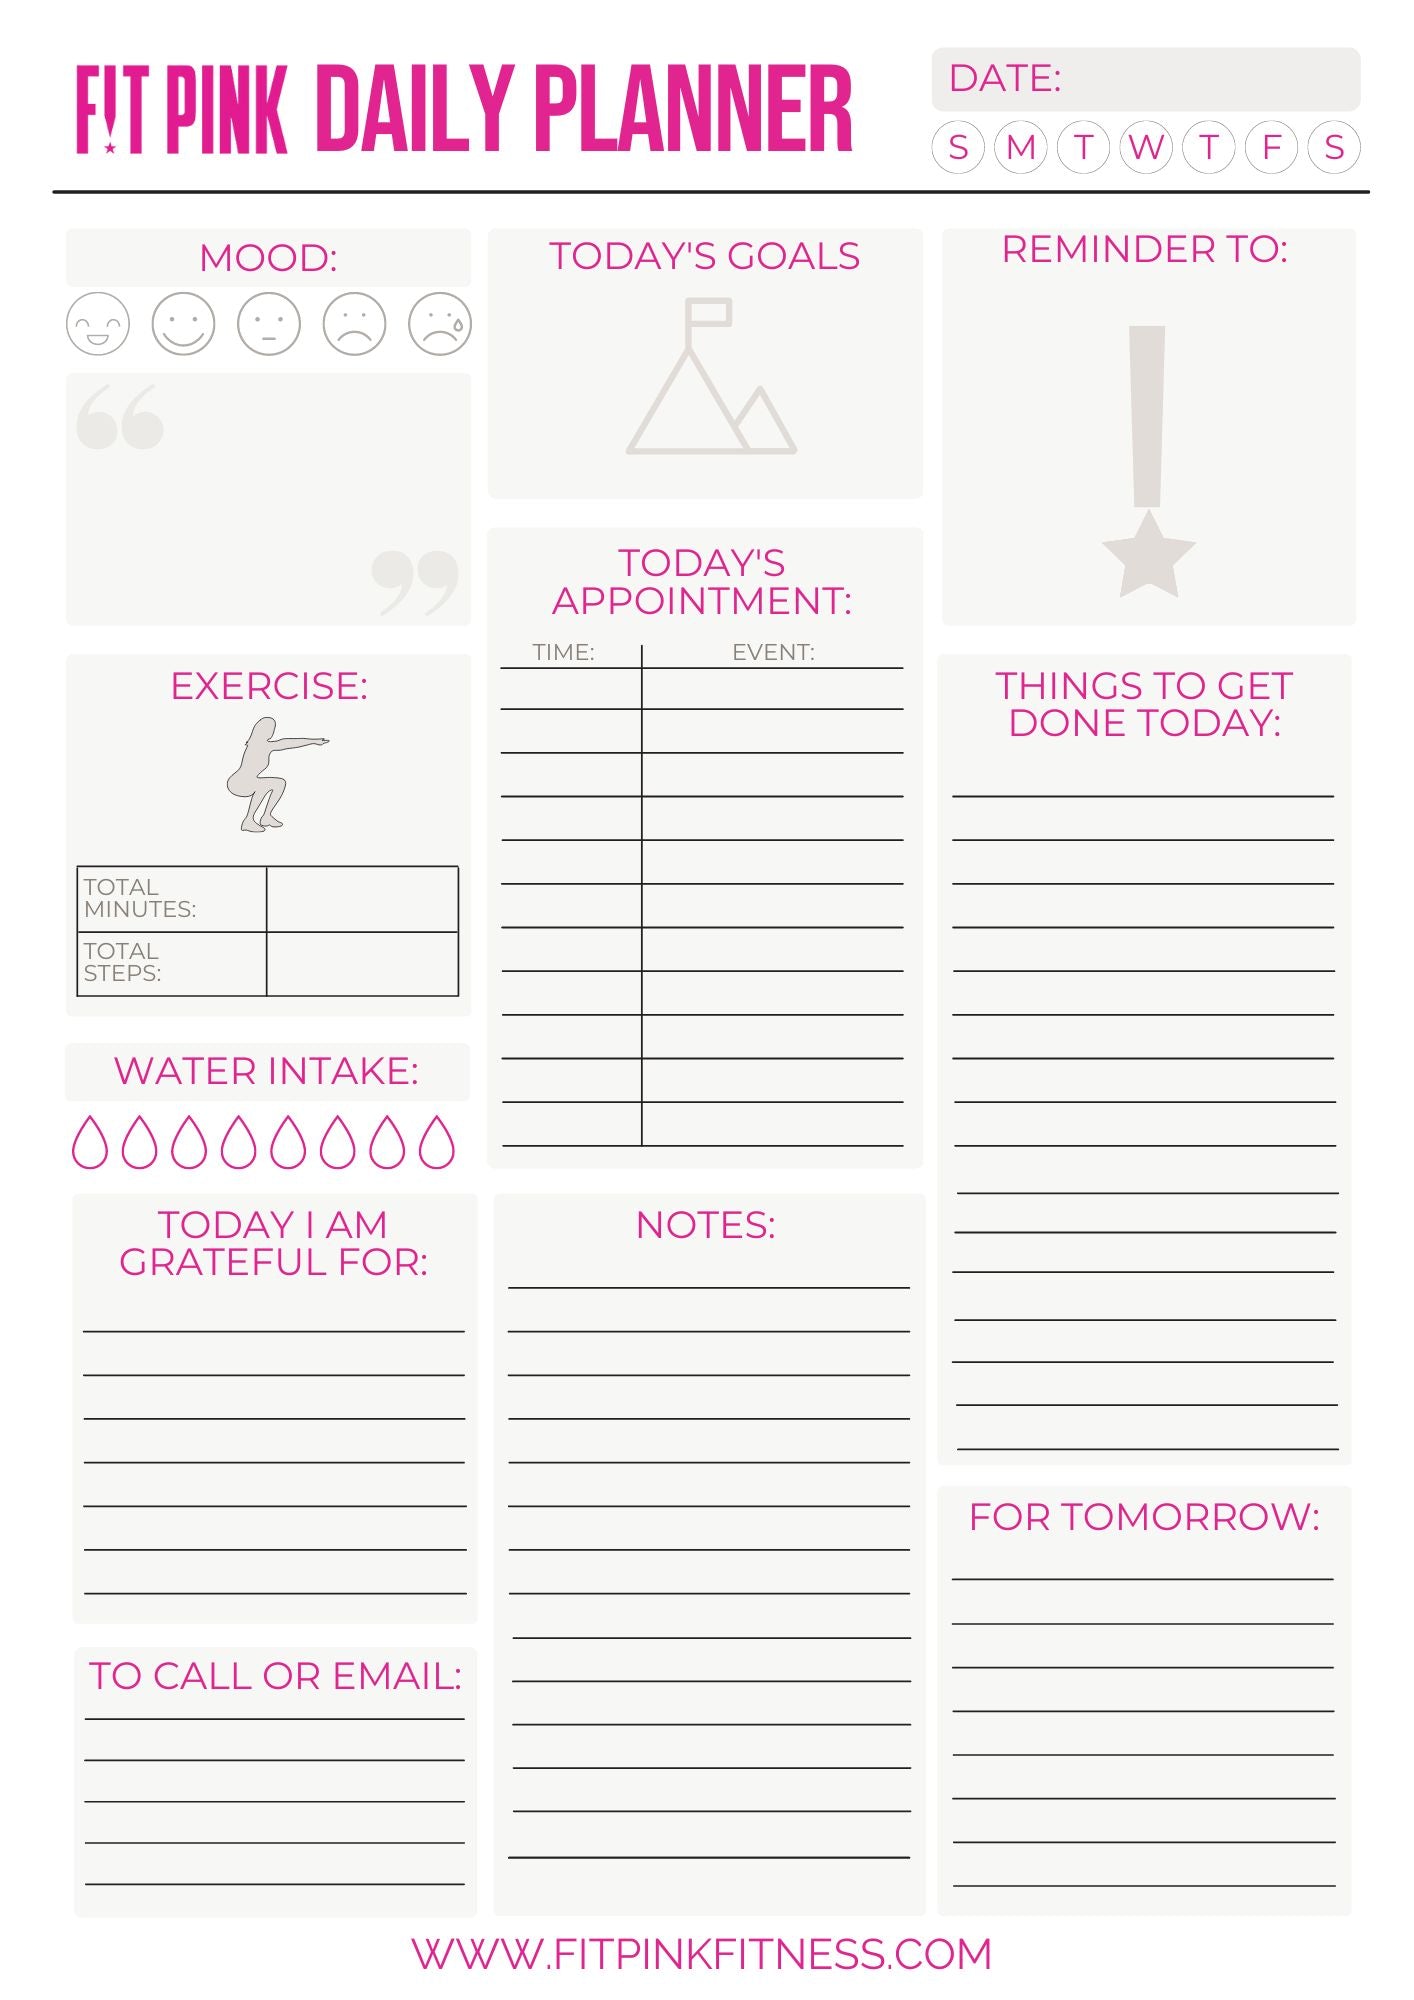 FitPink Daily Planner